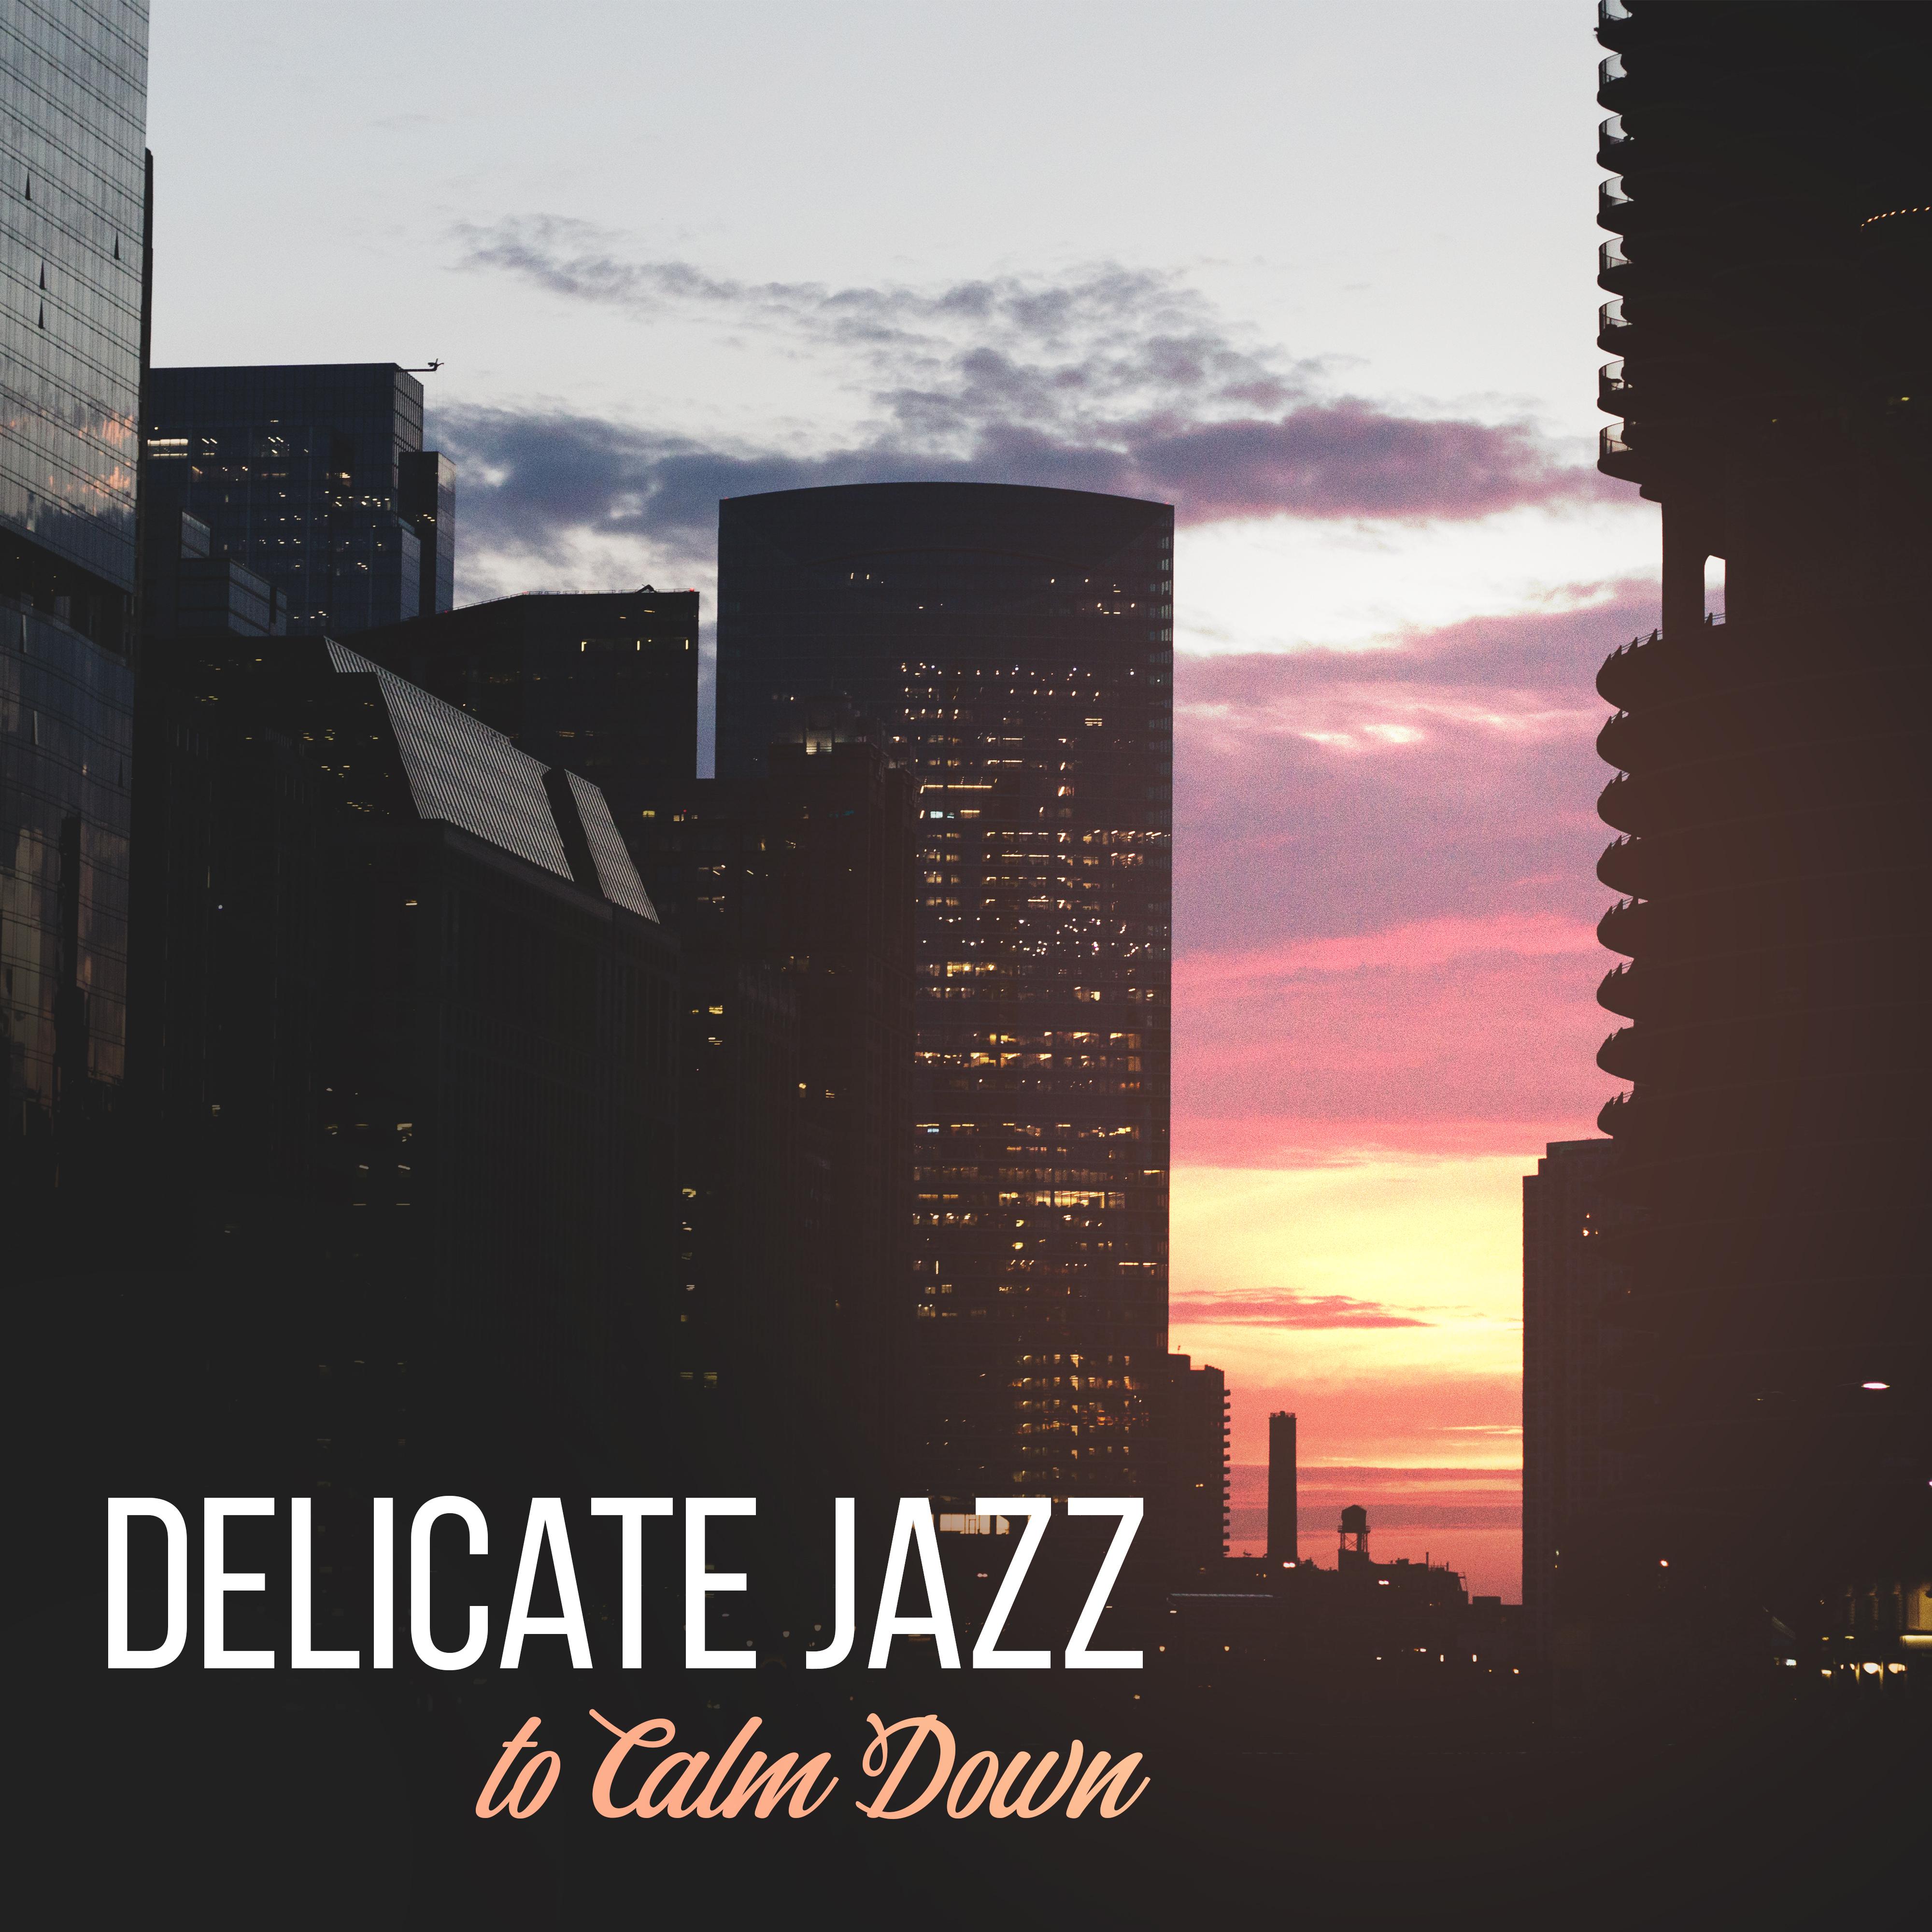 Delicate Jazz to Calm Down